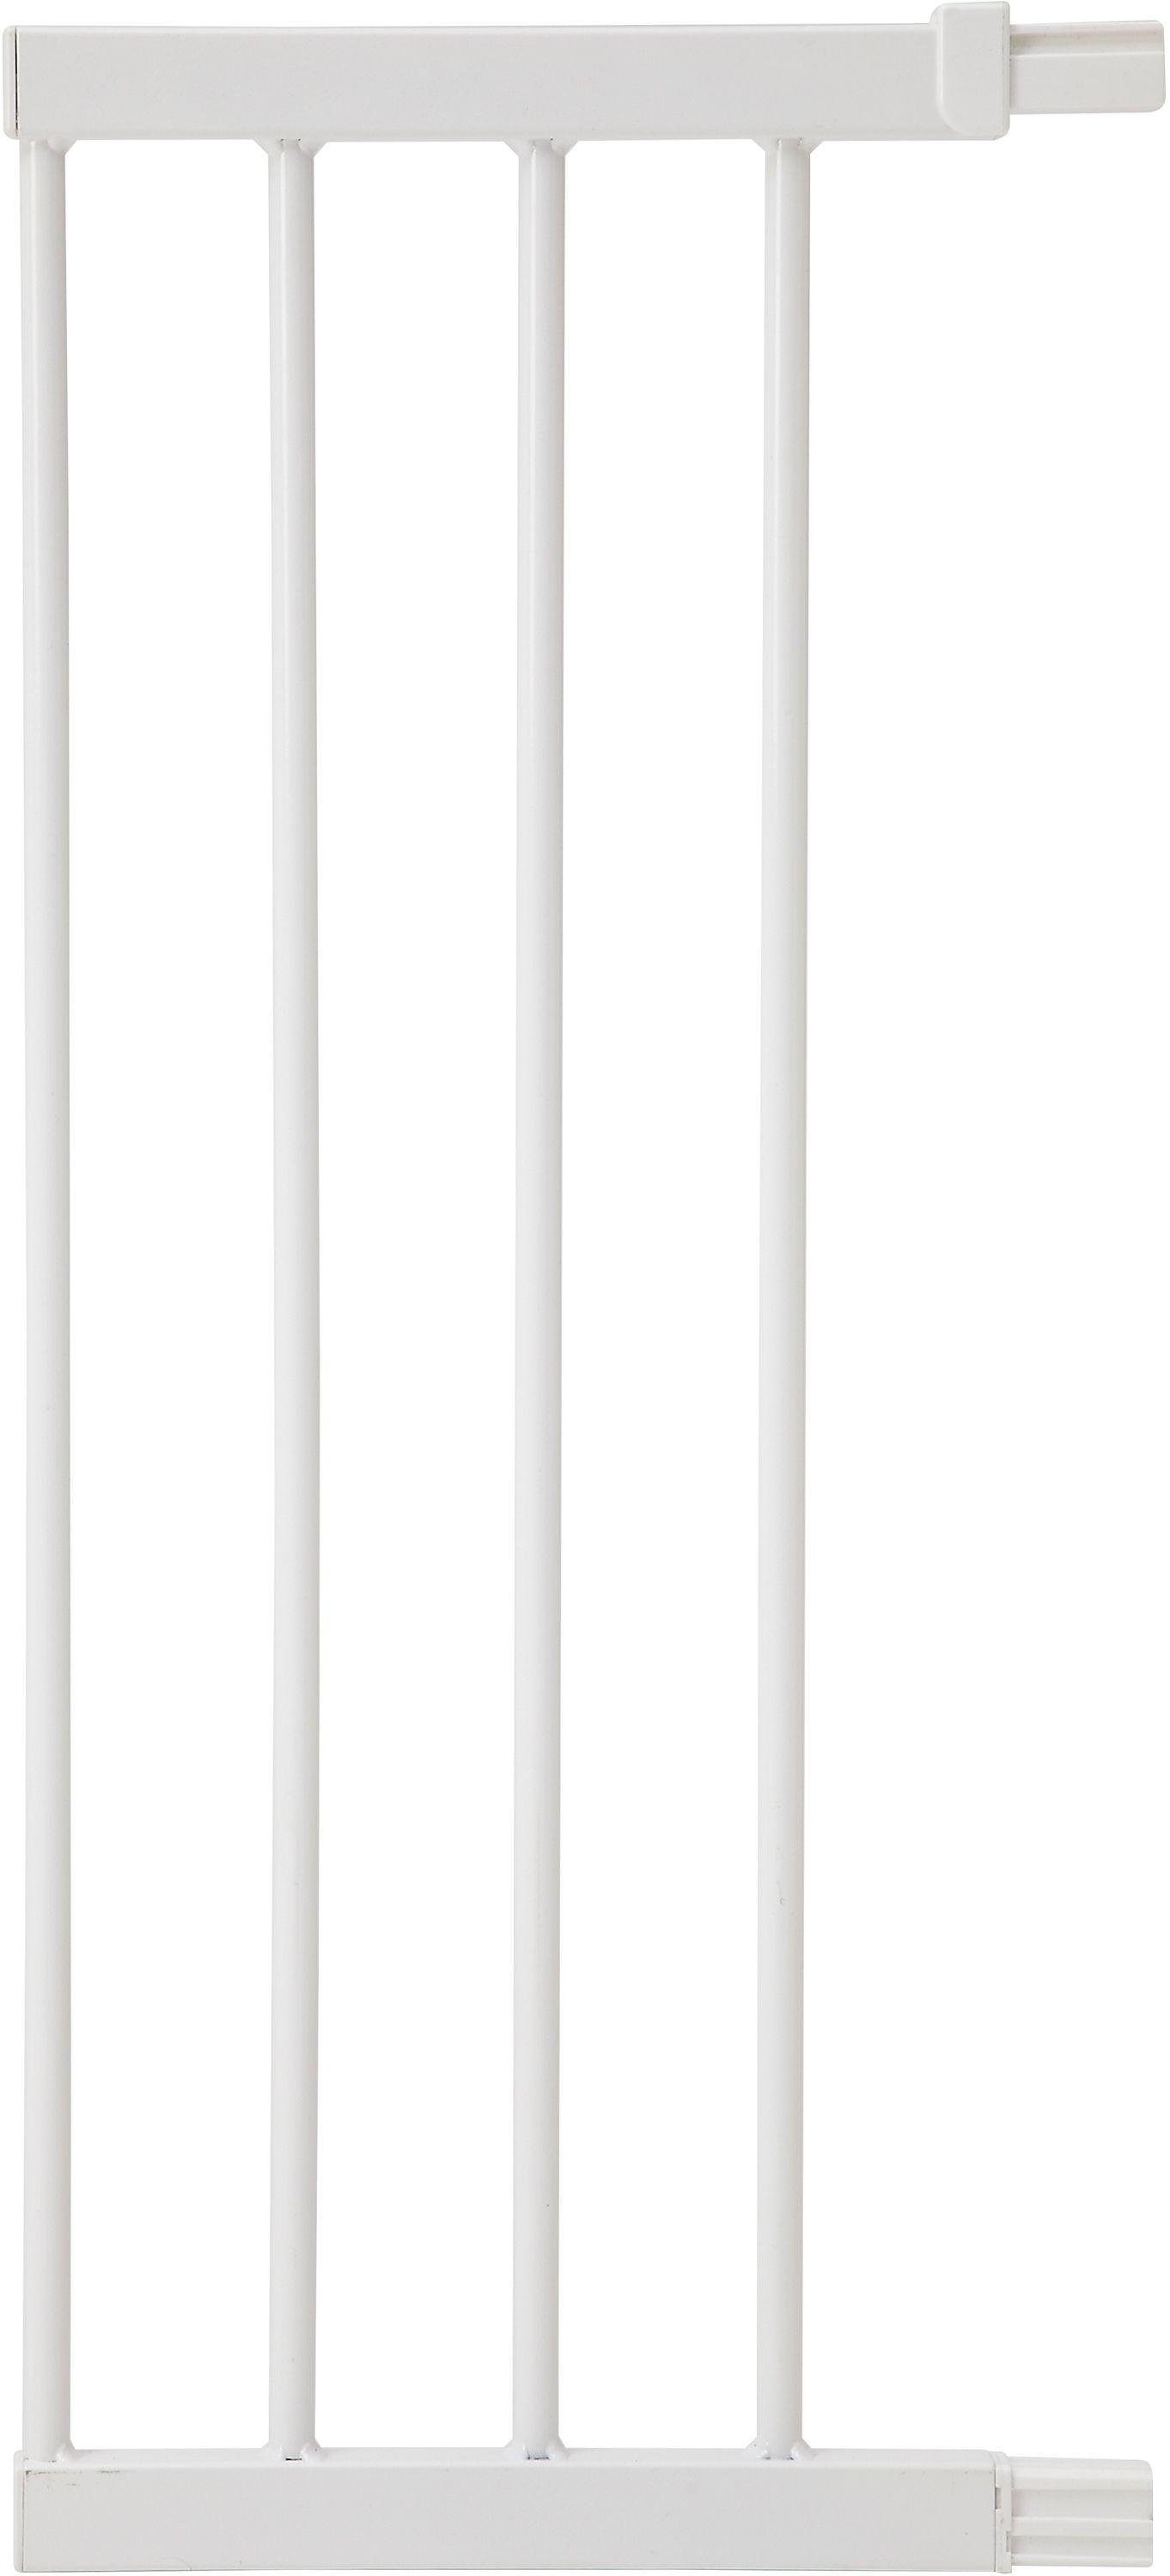 Safety 1st 28cm Safety Gate Extension - White